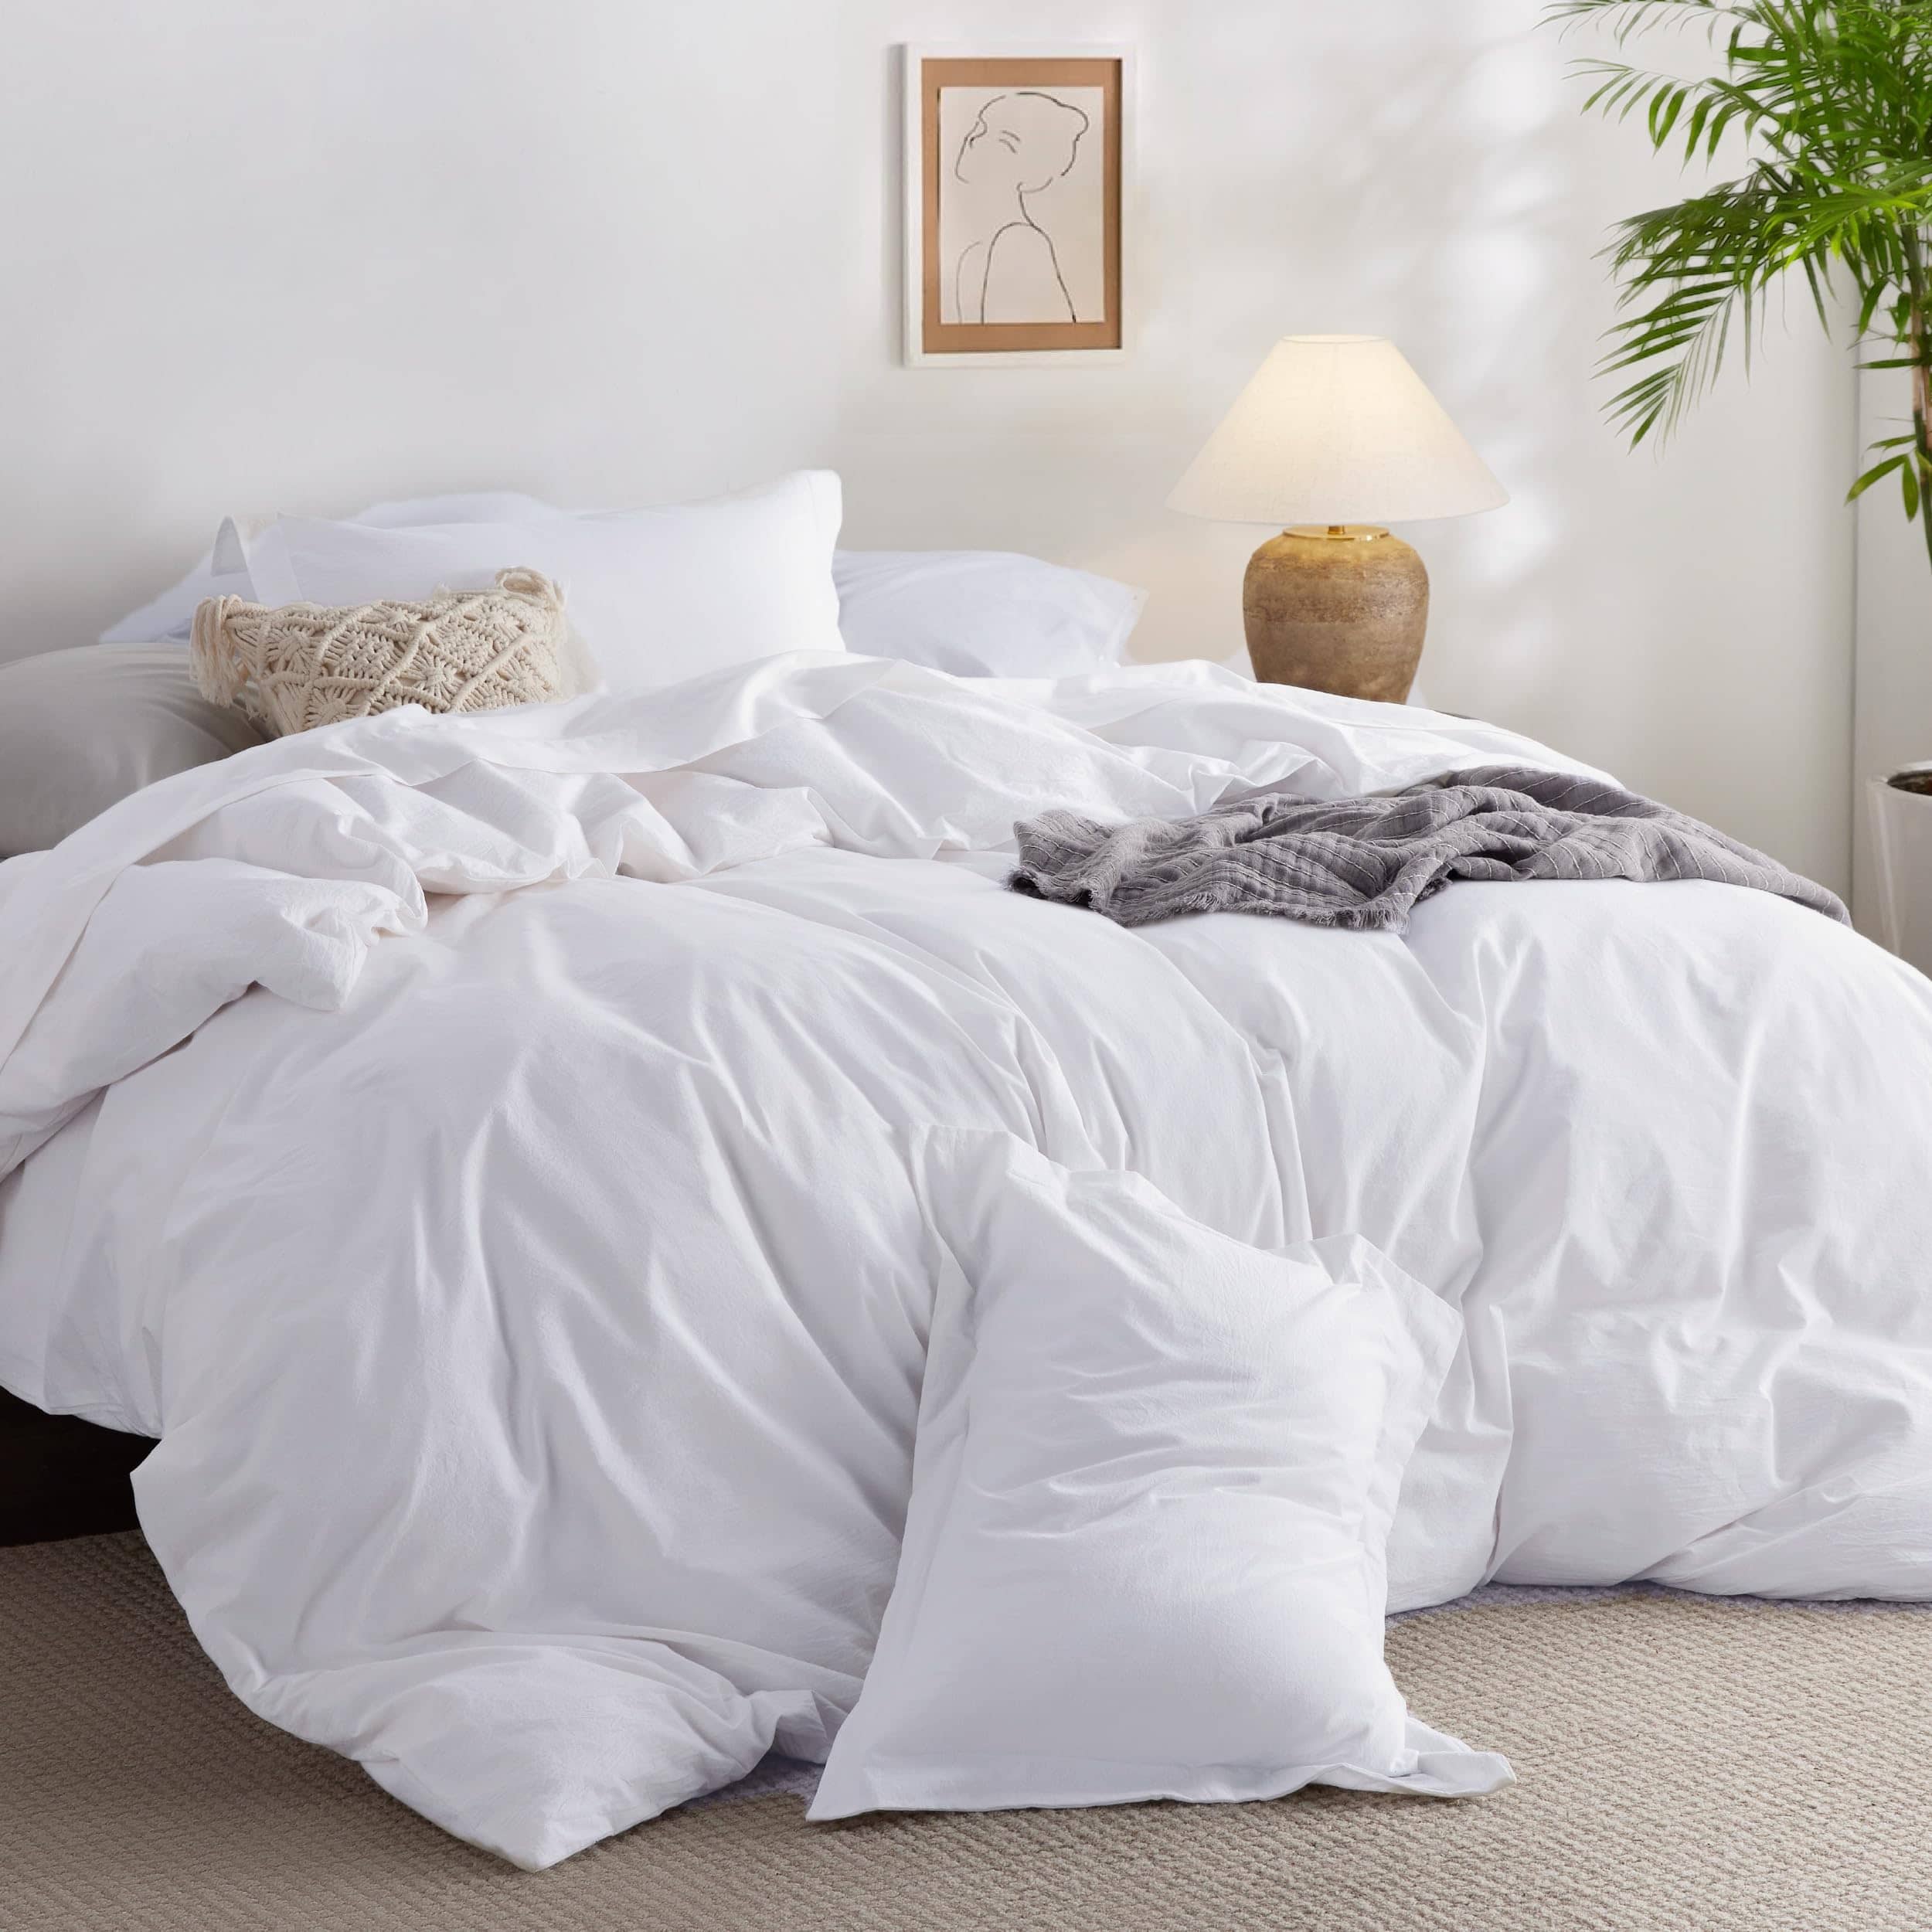 100% Washed Cotton Duvet Cover